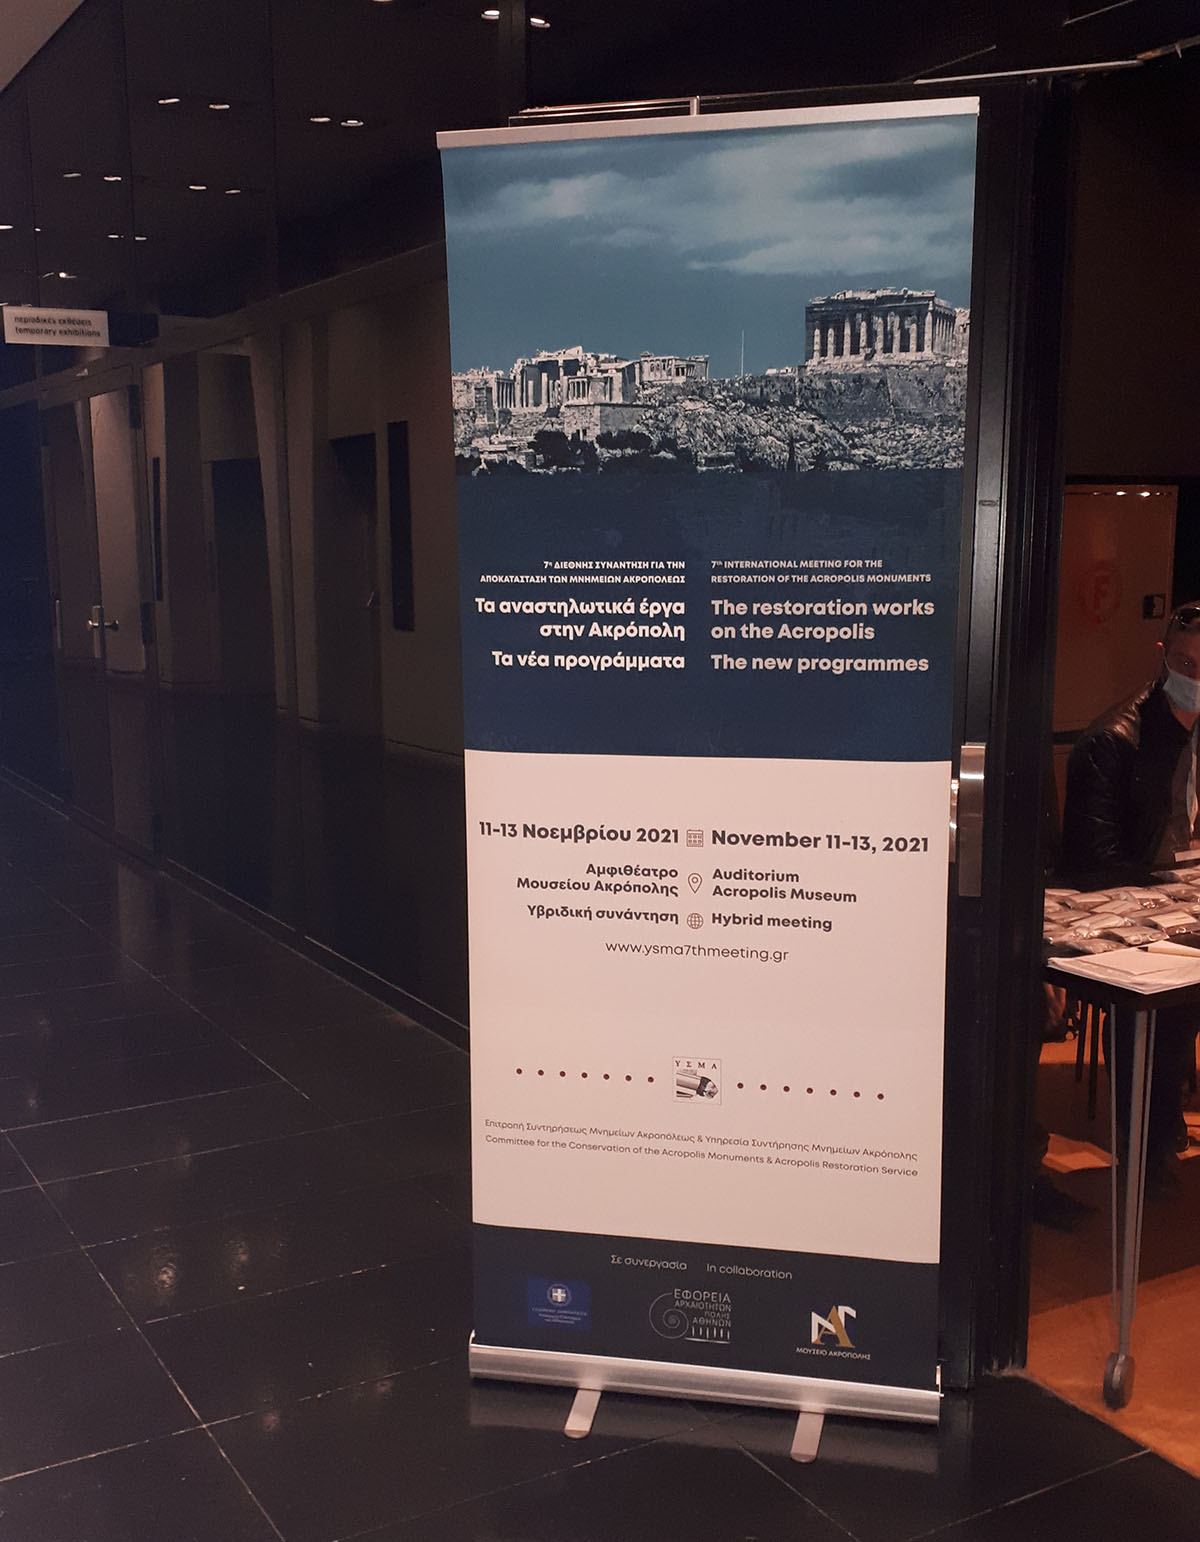 7th International Meeting for the Restoration of the Monuments of the Acropolis 2021